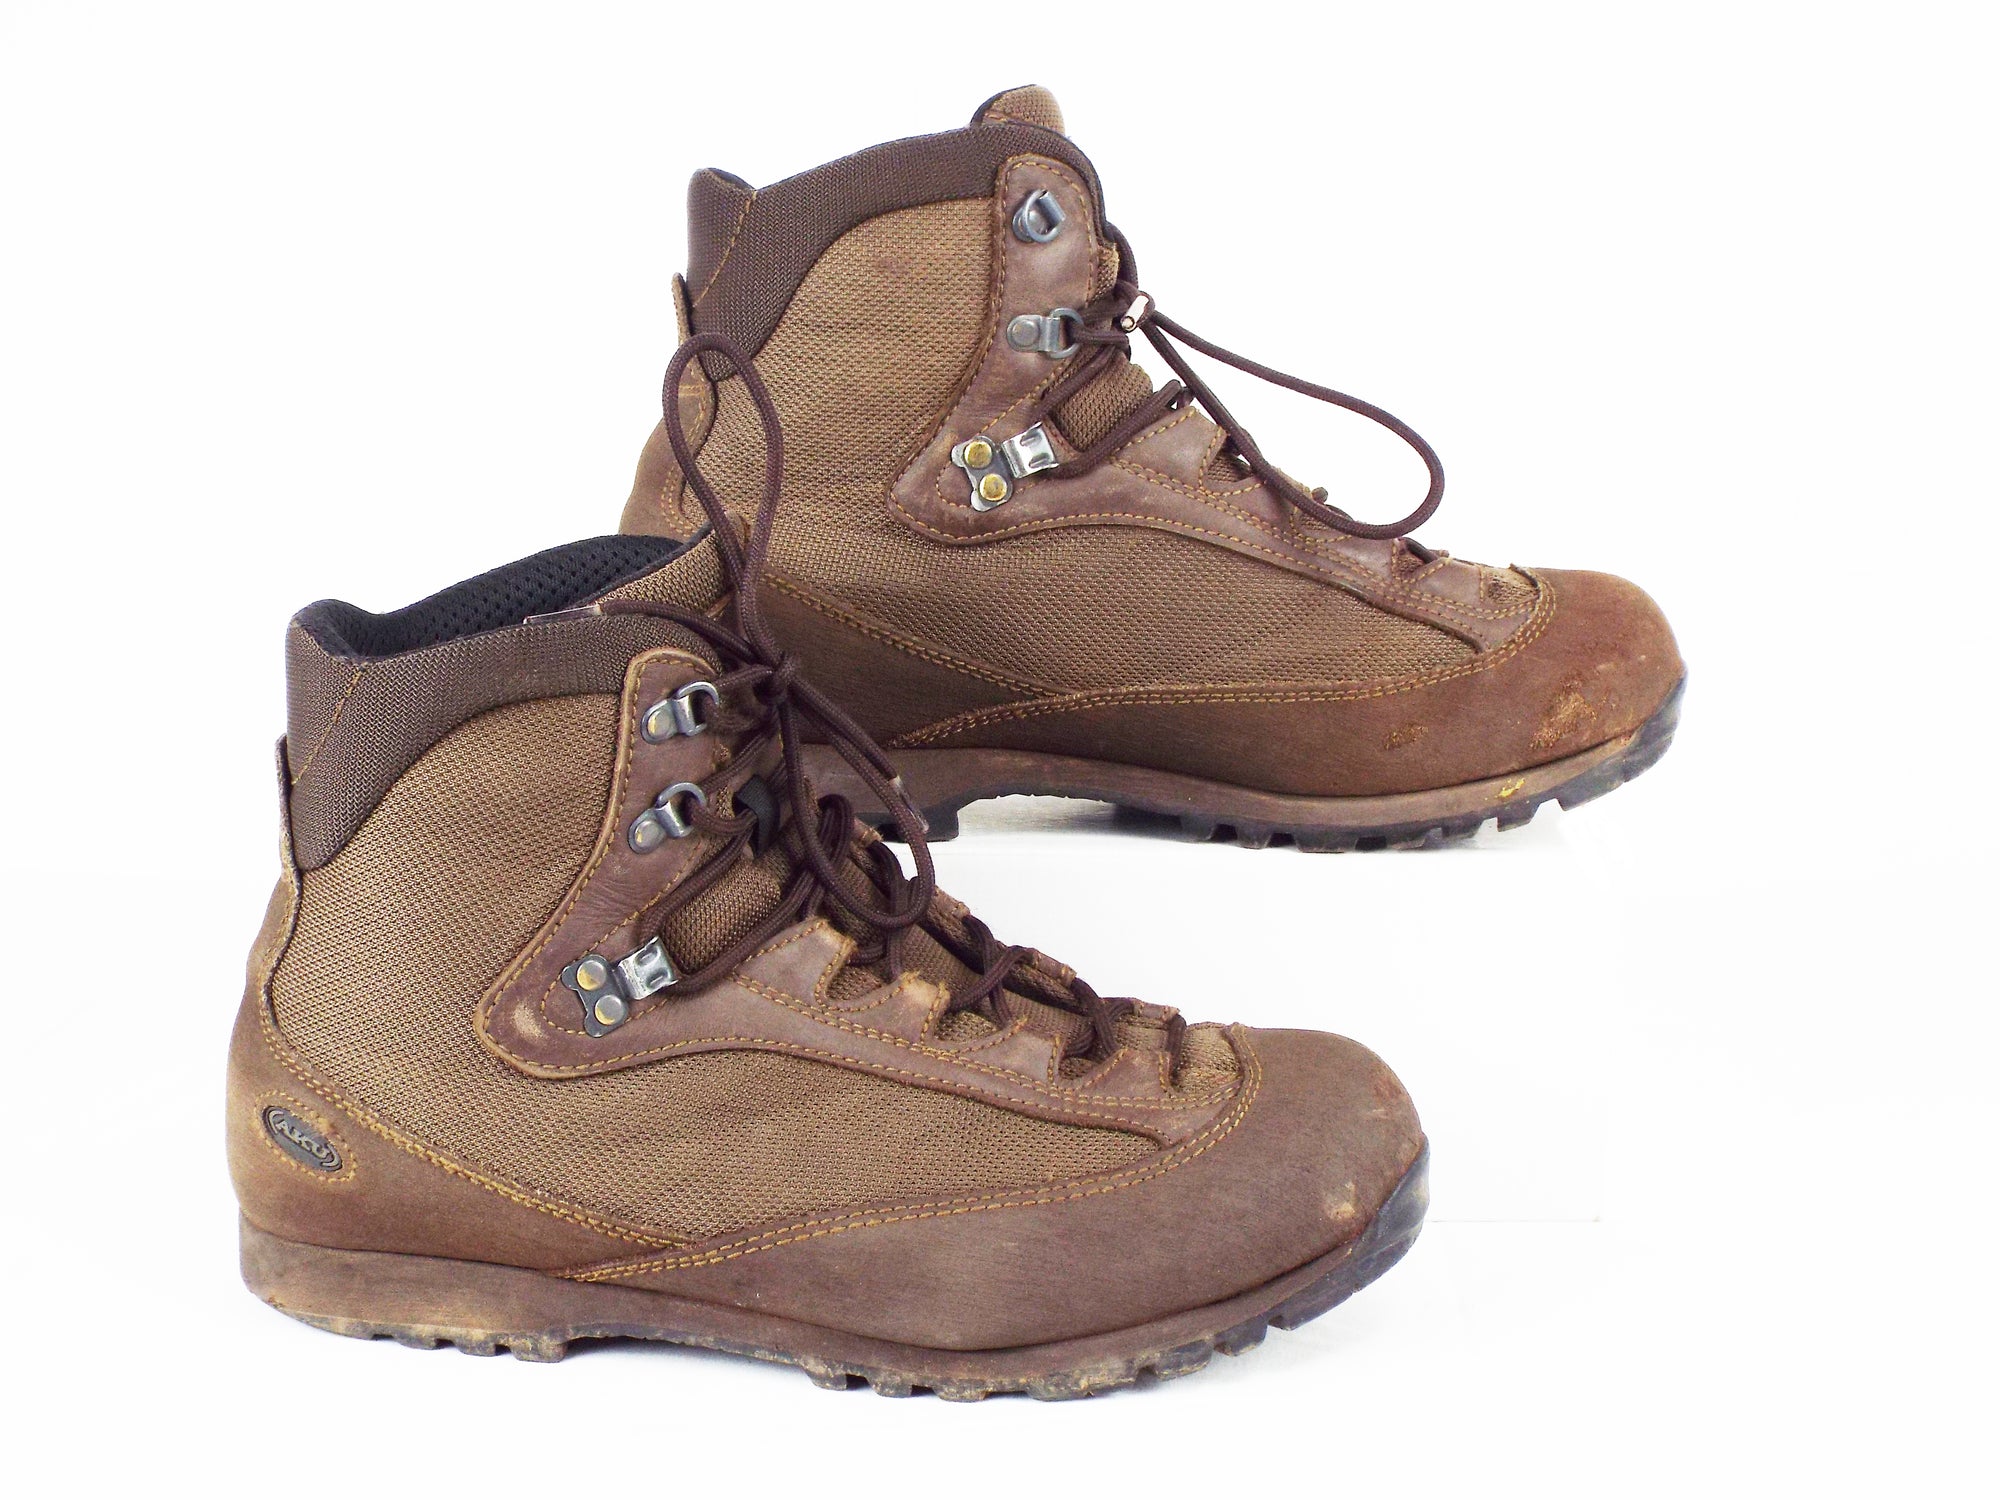 British Army - Brown Ankle Boots - AKU - Grade 1